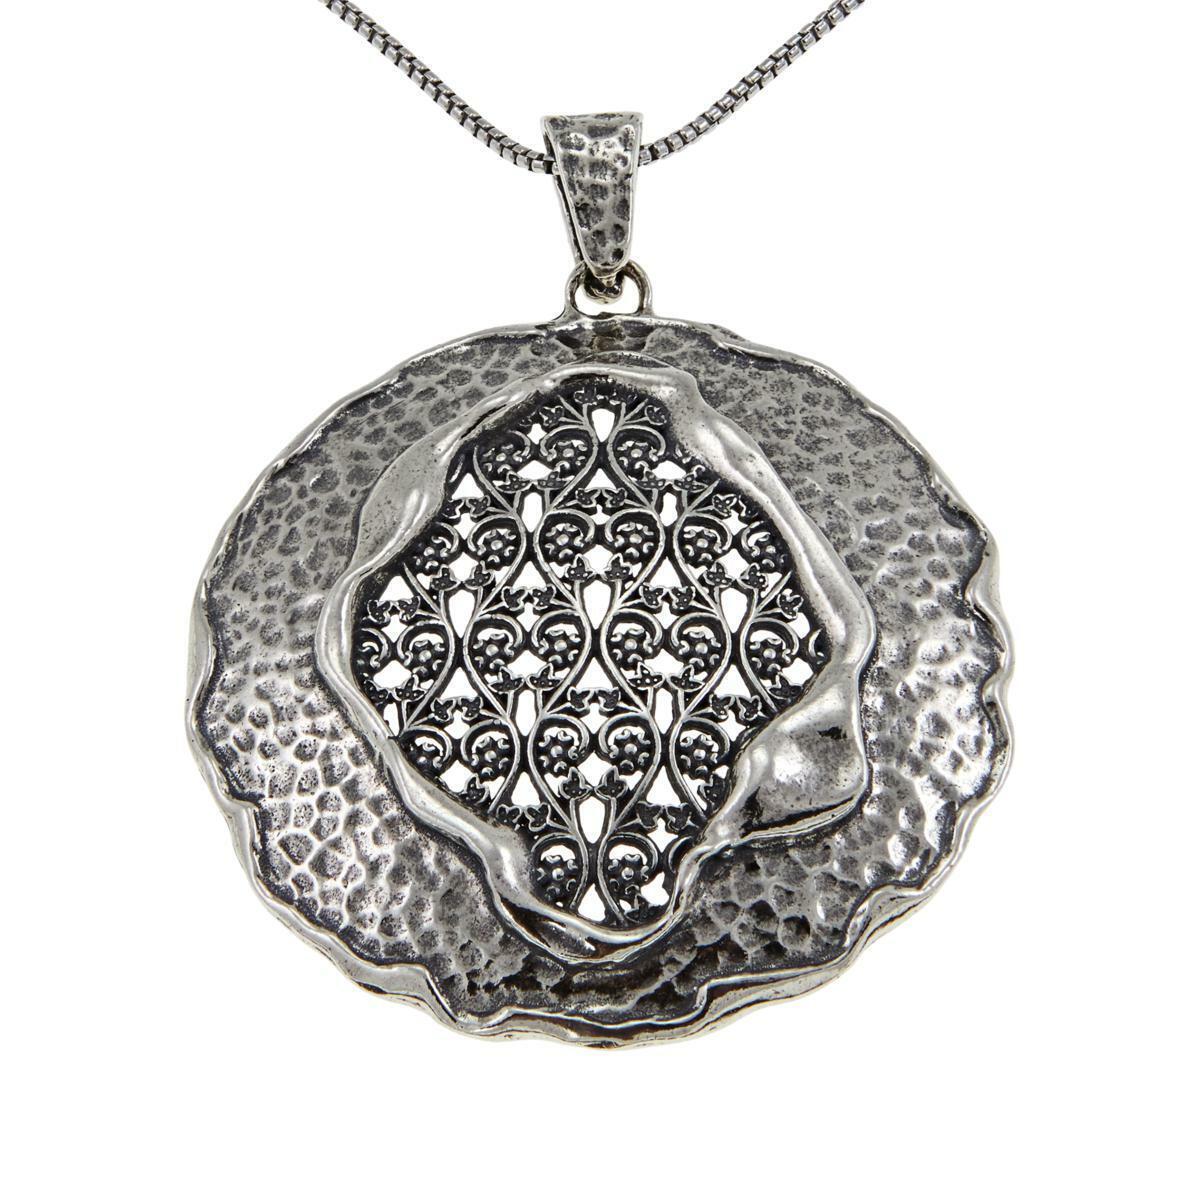 LiPaz Sterling SIlver Floral Filigree Textured Pendant with 36' Chain